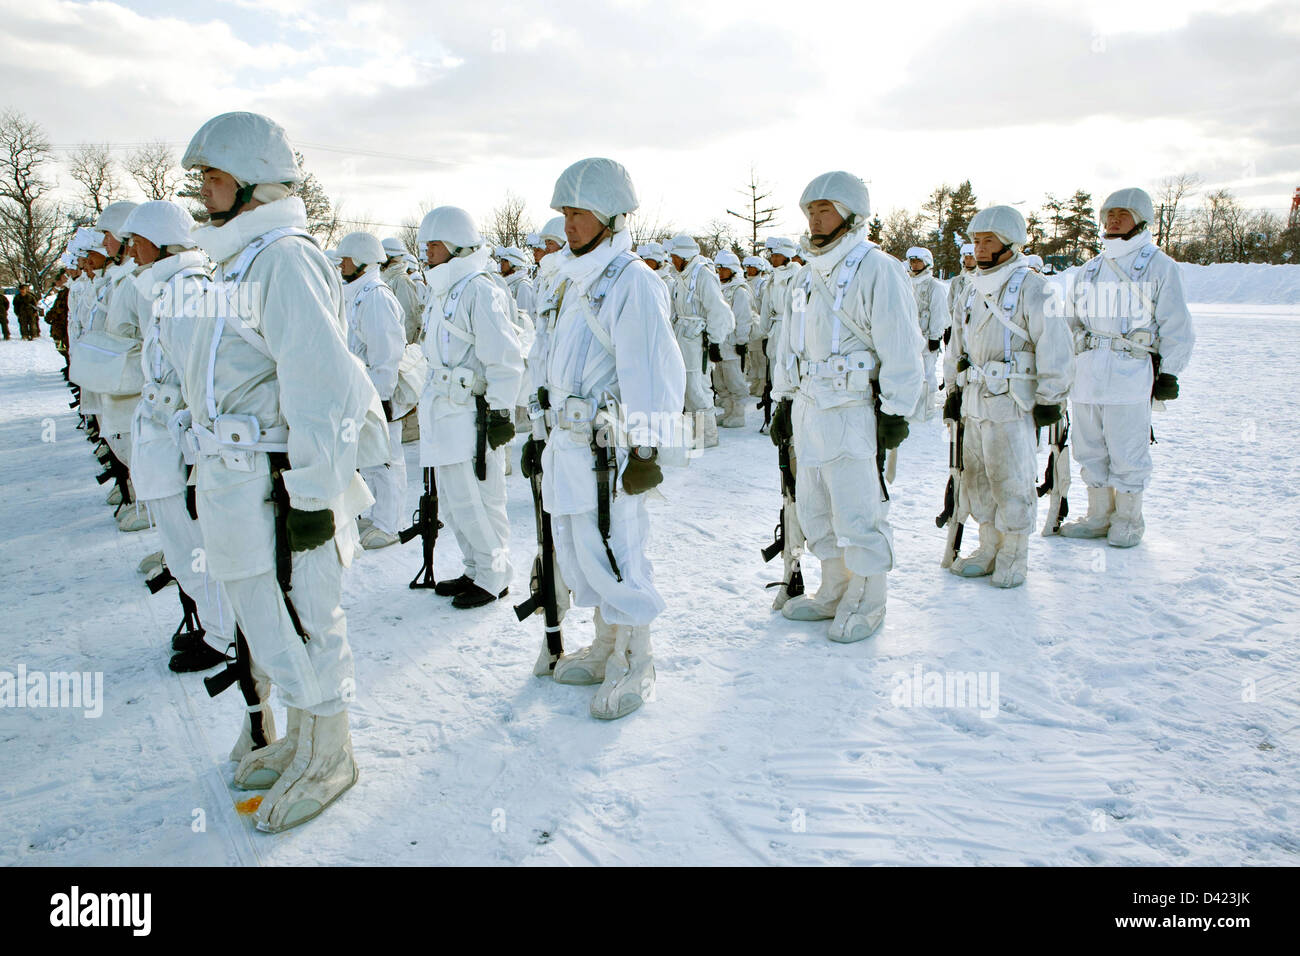 Soldiers with the Japan Ground Self-Defense Force stand in formation during winter exercises at the Hokkaido-Dai Maneuver Area February 26, 2013 in Hokkaido prefecture, Japan. The exercises are a joint training operation with Japan and the US under winter conditions. Stock Photo